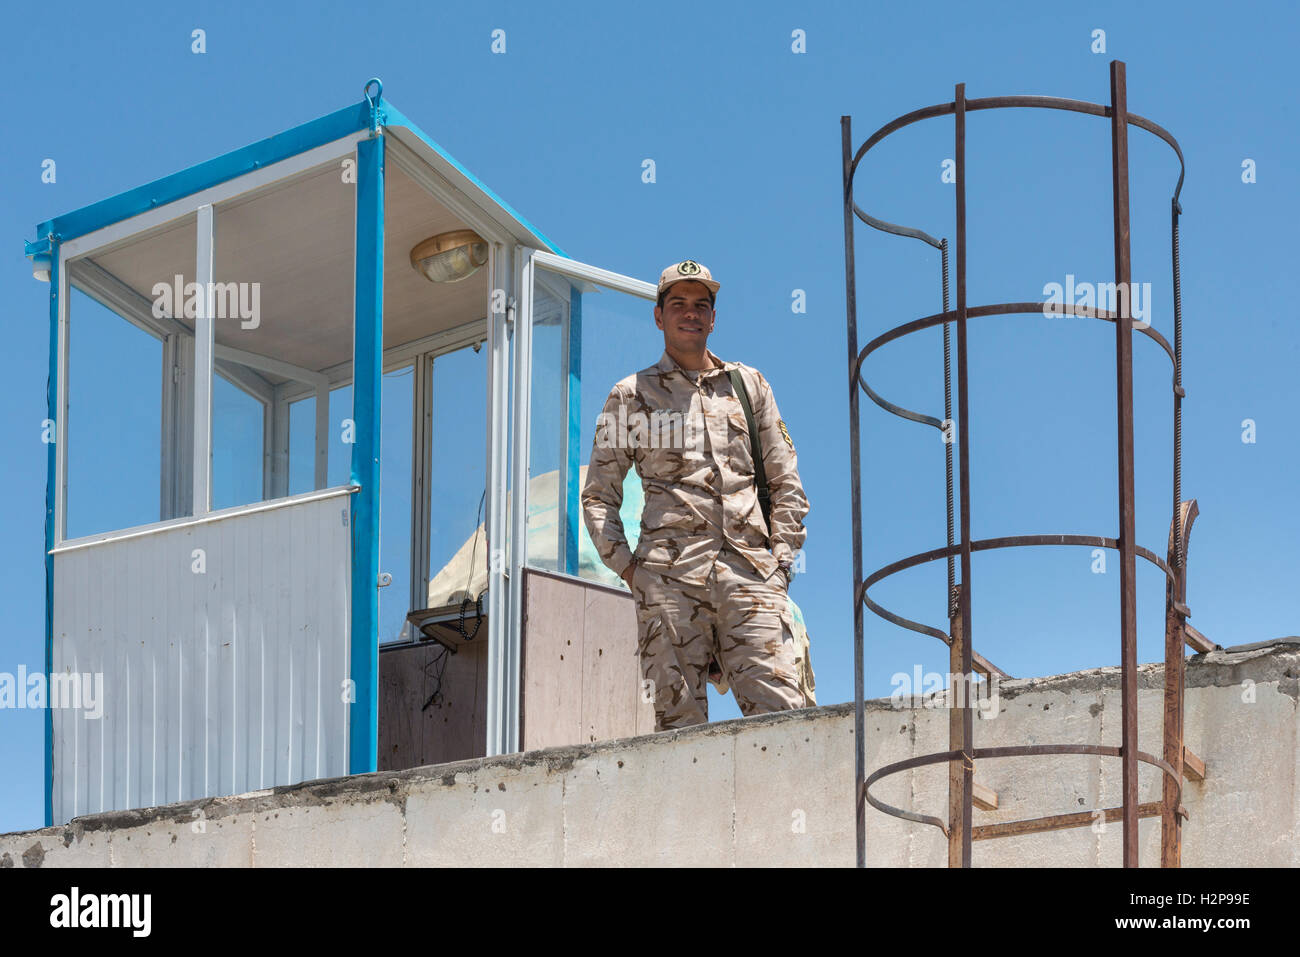 Kerman, Museum Of The Holy Defence, Sentinel Soldier On Rooftop Stock Photo